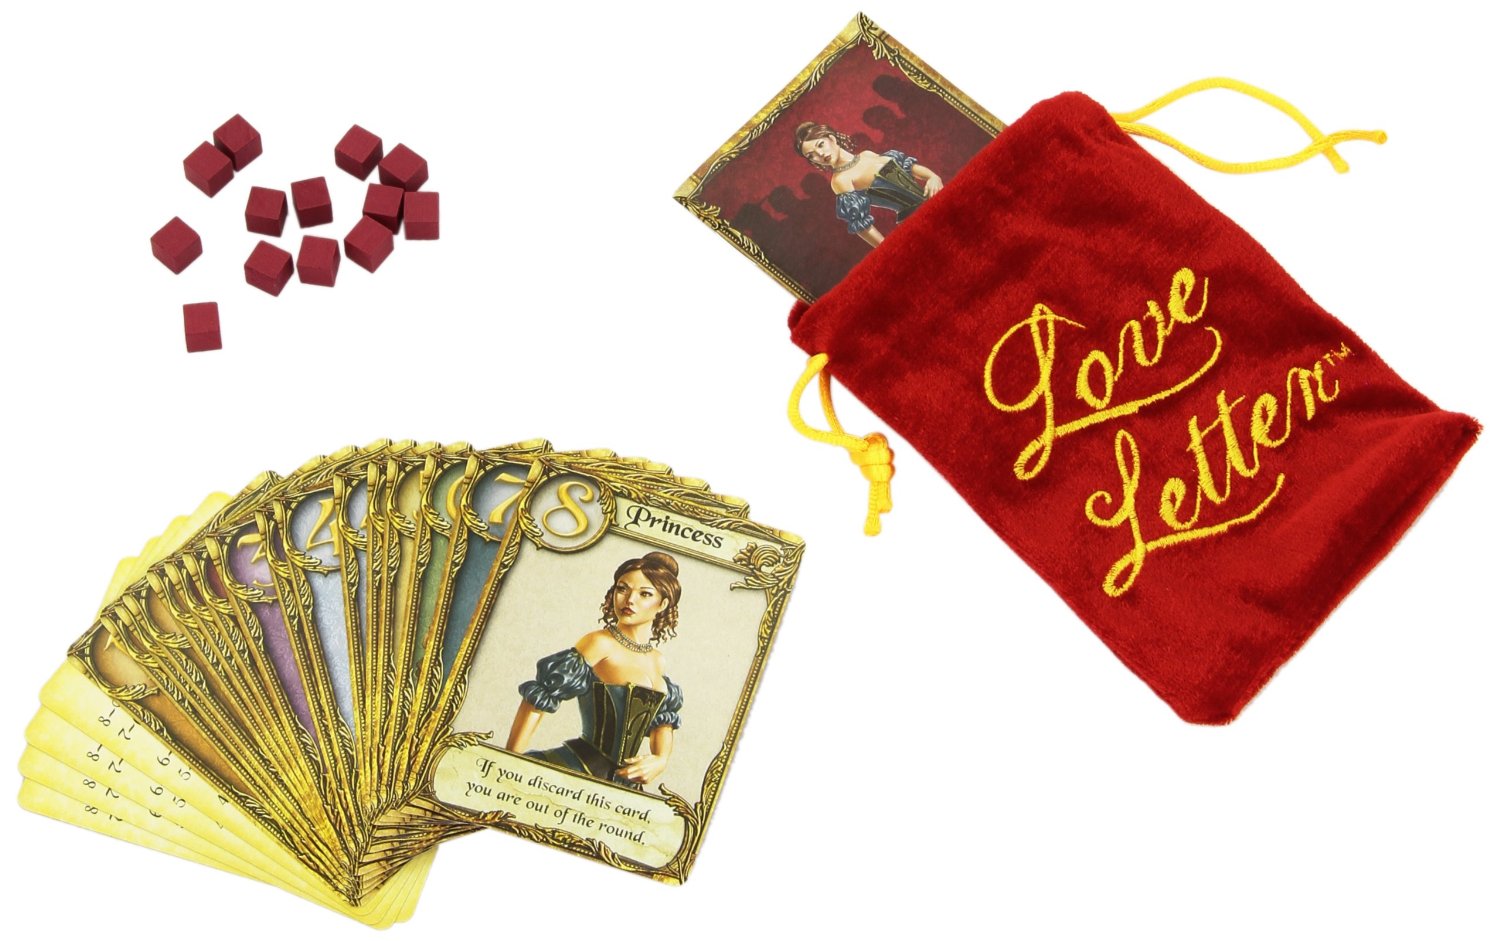 Love Letter Game - Clamshell Version